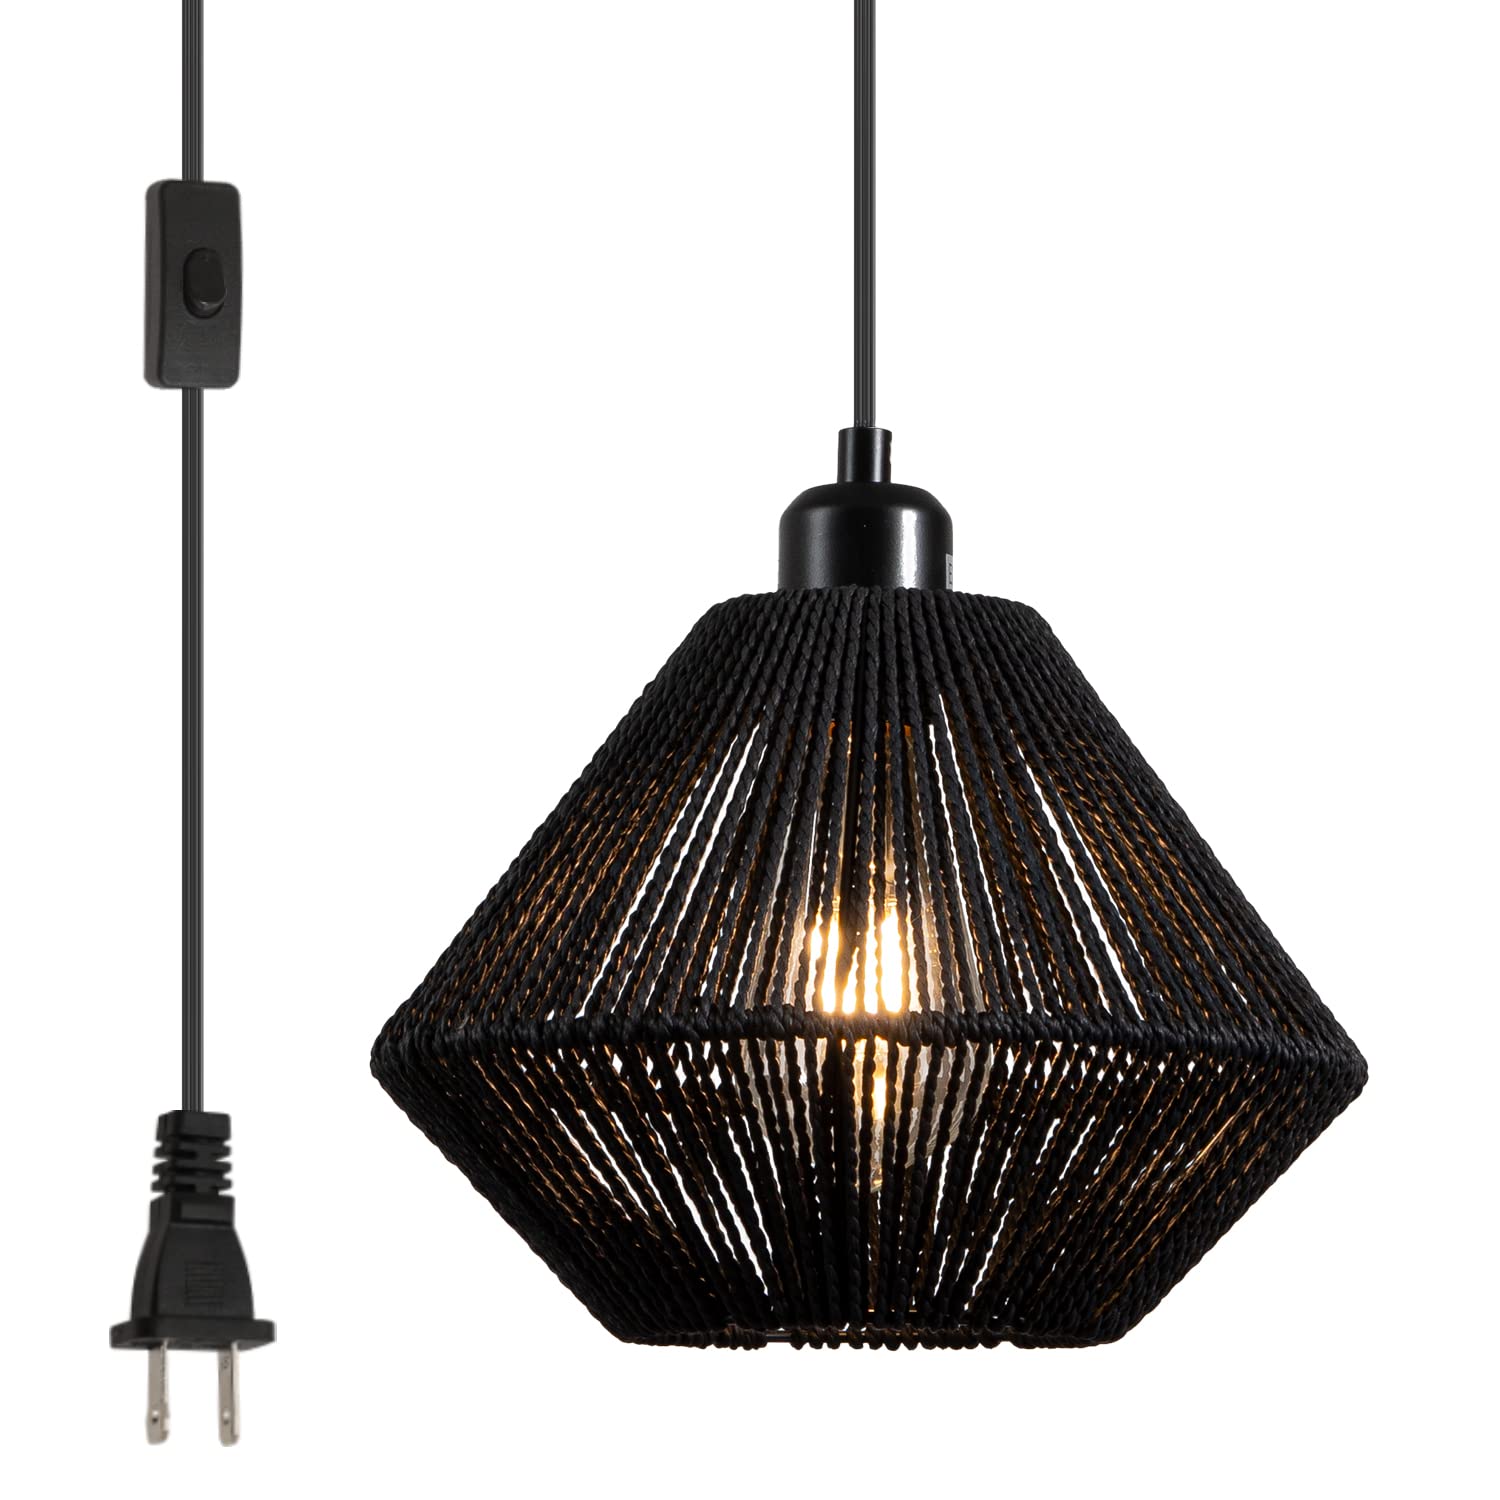 YongMing CL Black Woven Plug in Pendant Light Fixture, 9.65’’ Rustic Farmhouse Pendant Hanging Light with Plug in Cord & On/Off Switch for Kitchen Island Living Dining Room Bedroom Foyer